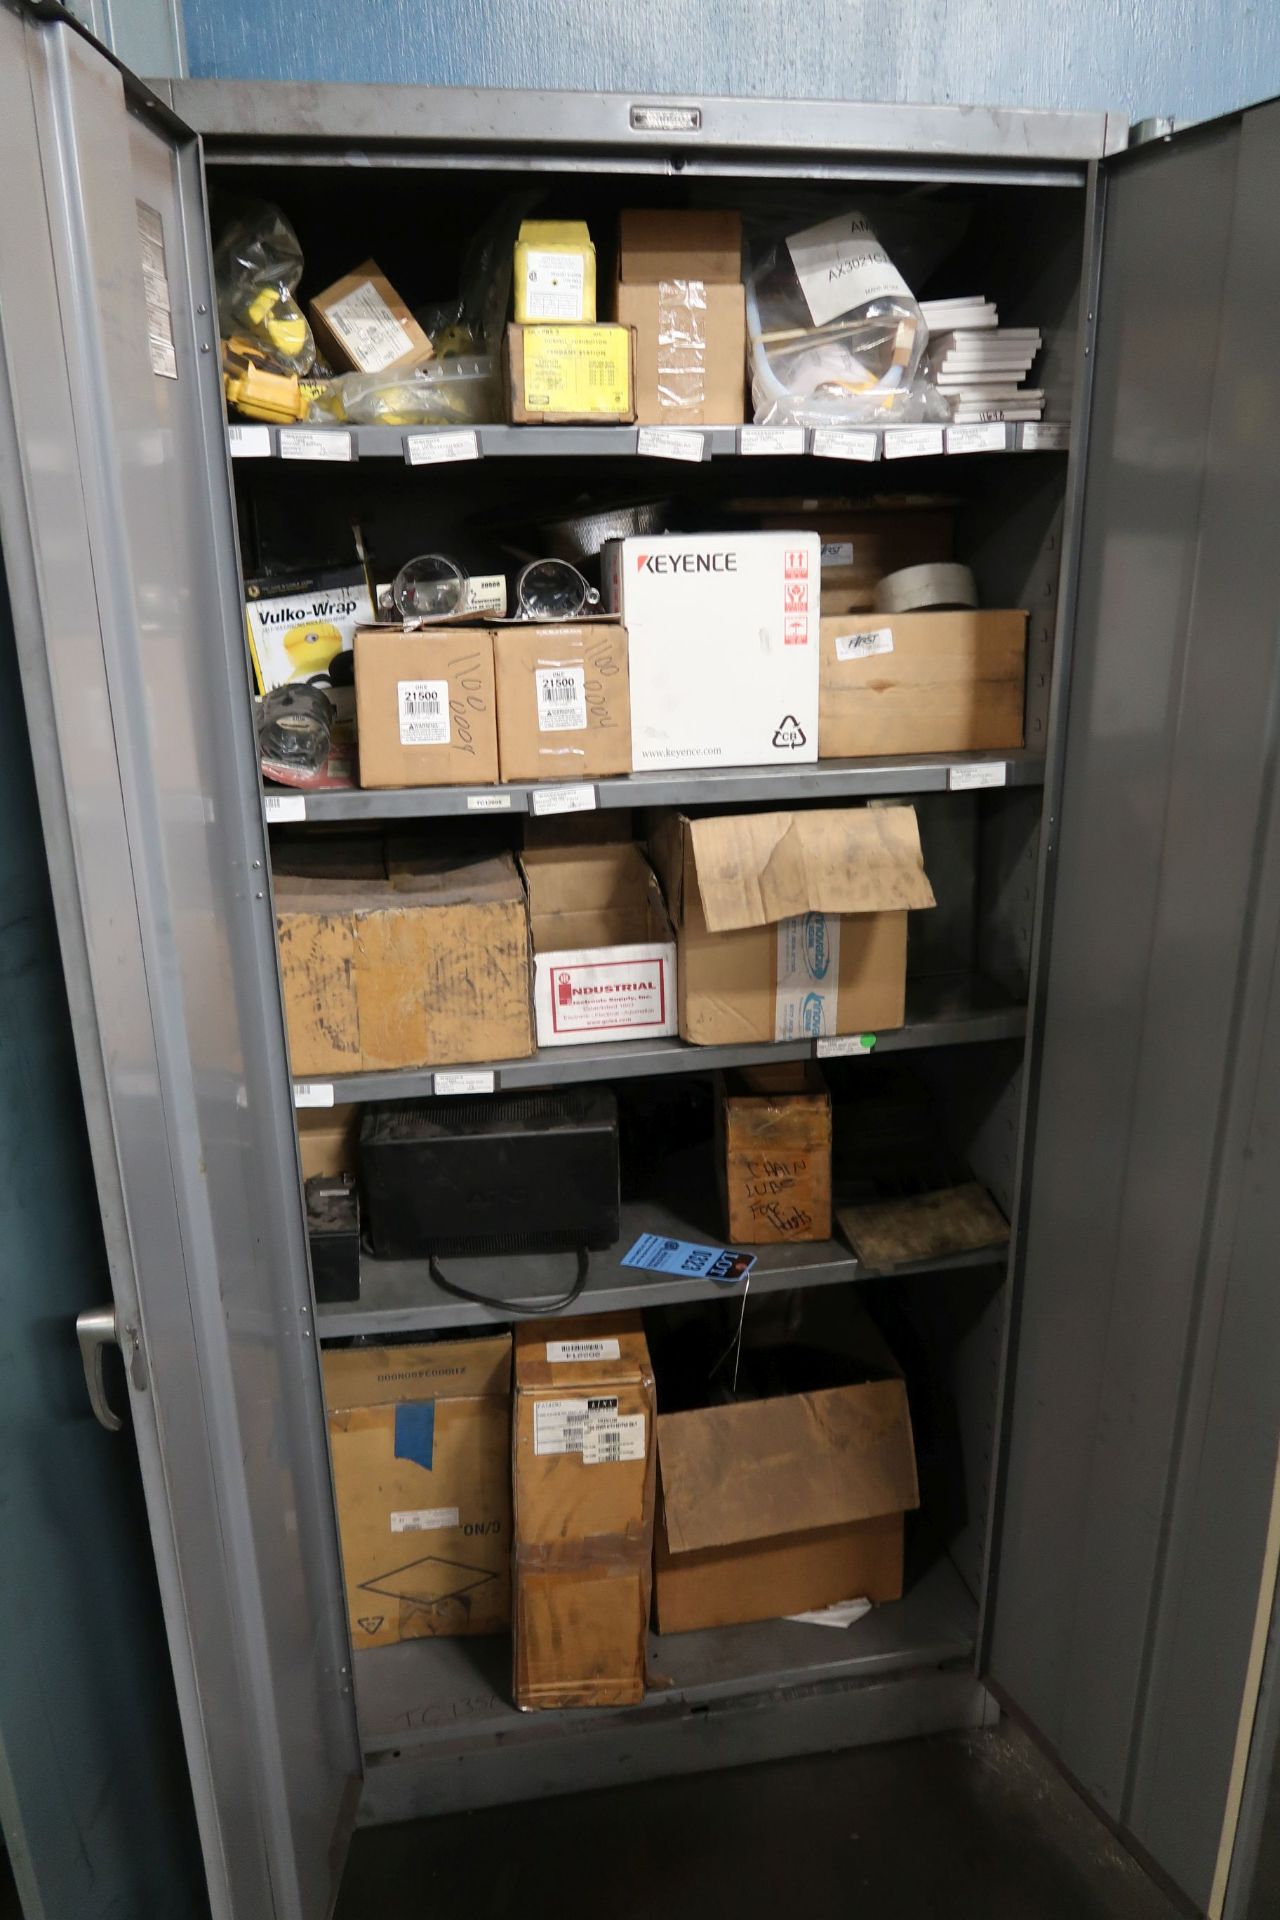 (LOT) STORAGE CABINET WITH MACHINE PARTS **LOADING PRICE DUE TO ERRA - $50.00**